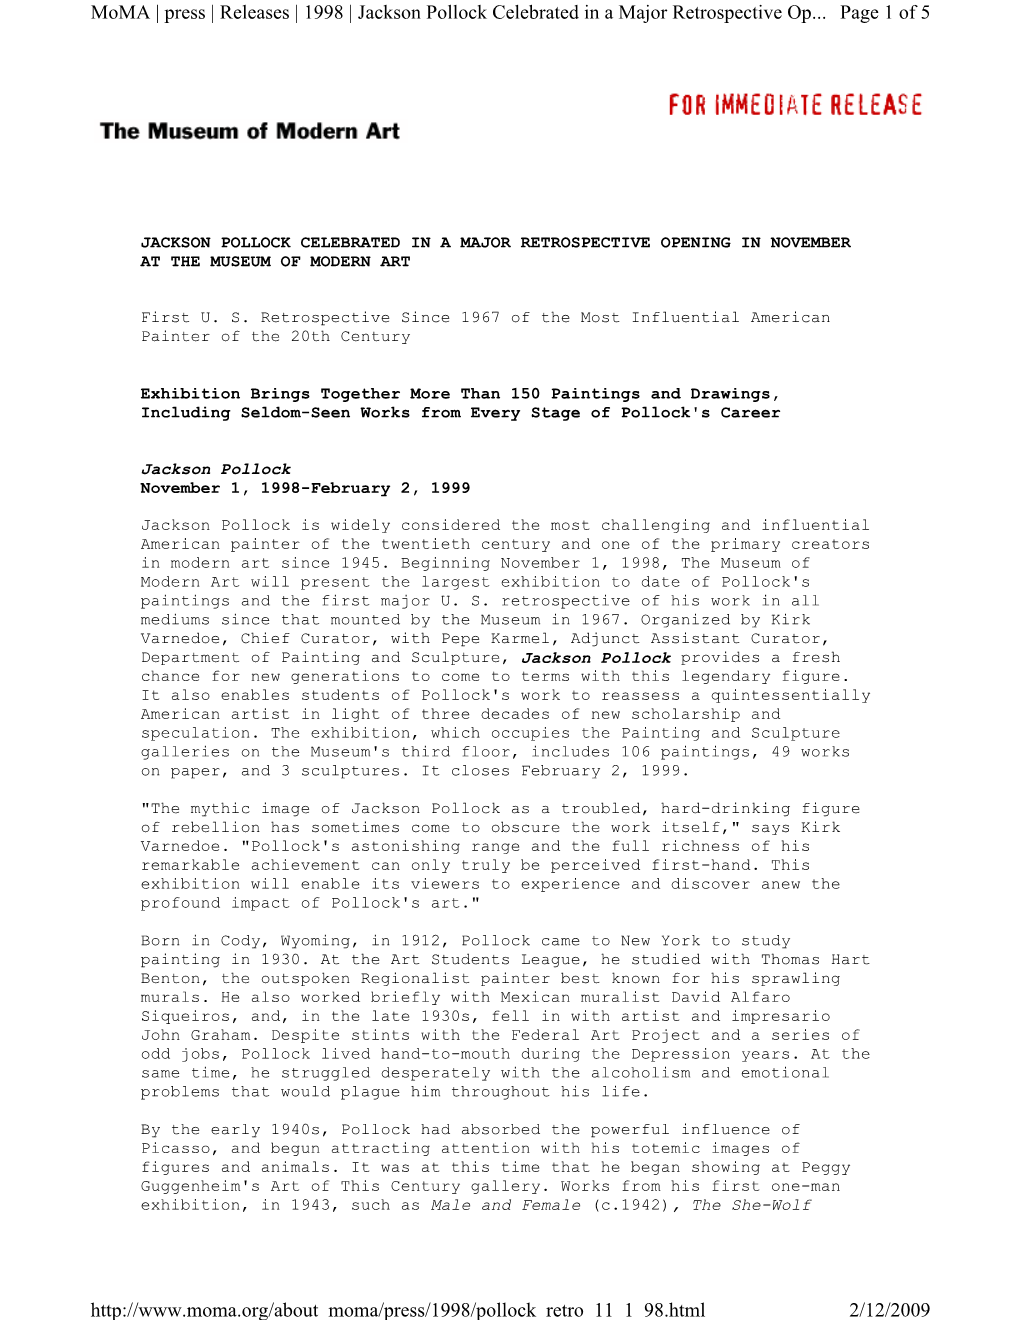 Page 1 of 5 Moma | Press | Releases | 1998 | Jackson Pollock Celebrated